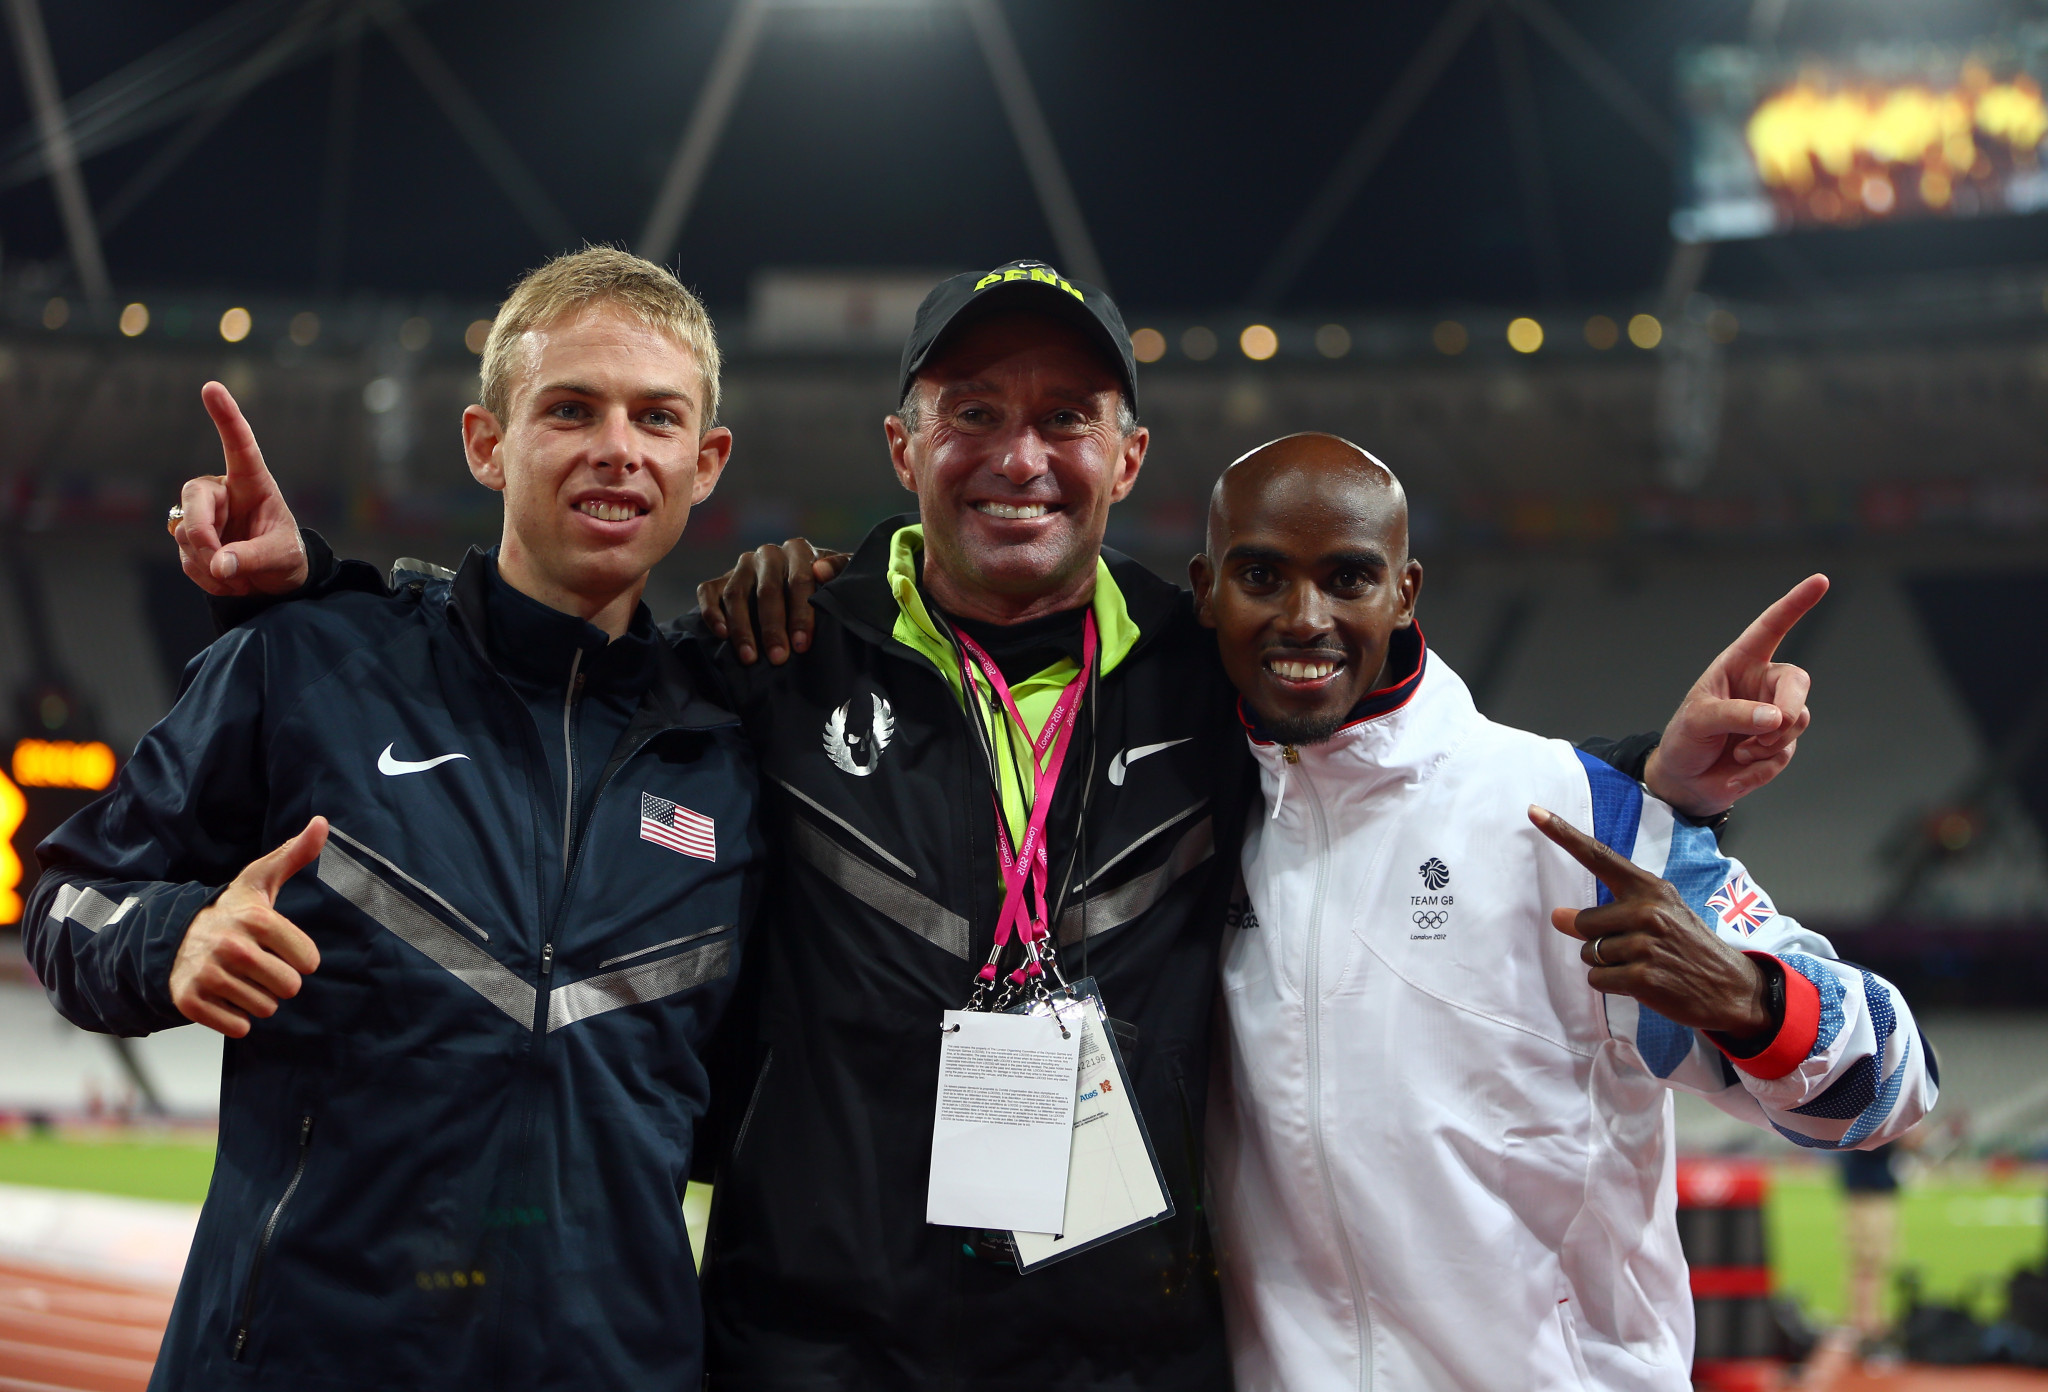 Britain's Sir Mo Farah, right, who won four Olympic gold medals under the coaching regime of now disgraced Alberto Salazar having previously had little success, claims he has 